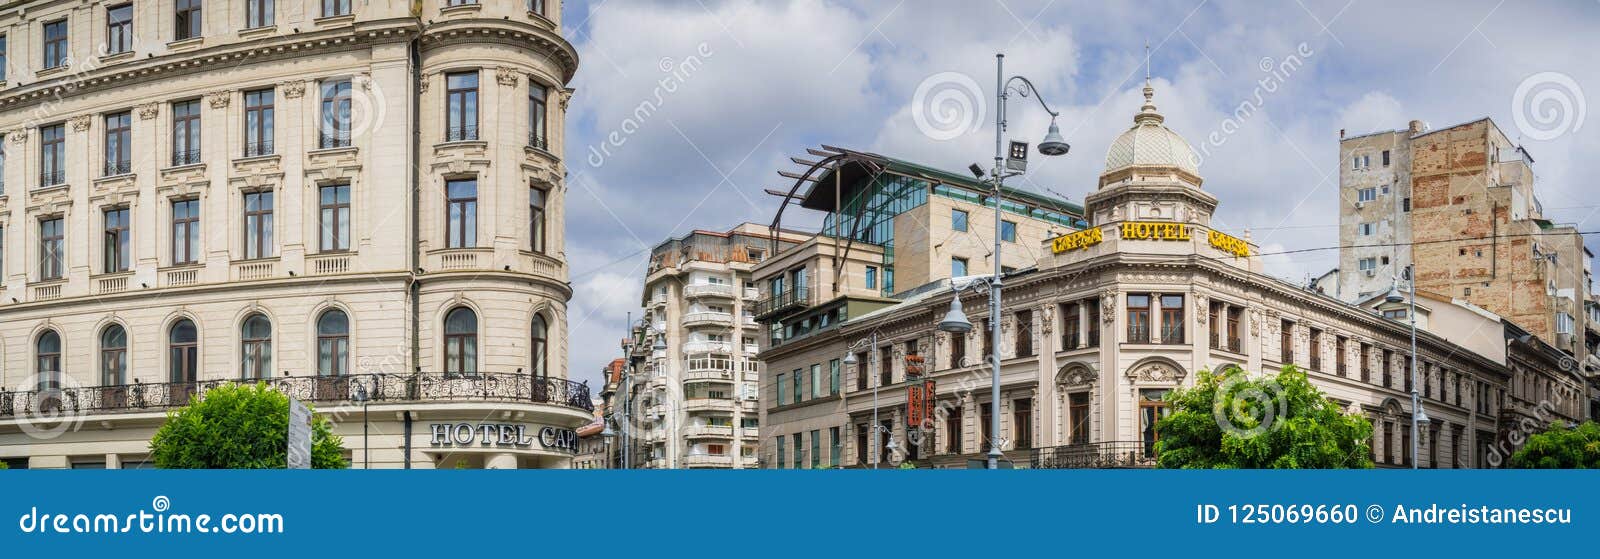 Capsa Hotel Photos - Free & Royalty-Free Stock Photos from Dreamstime